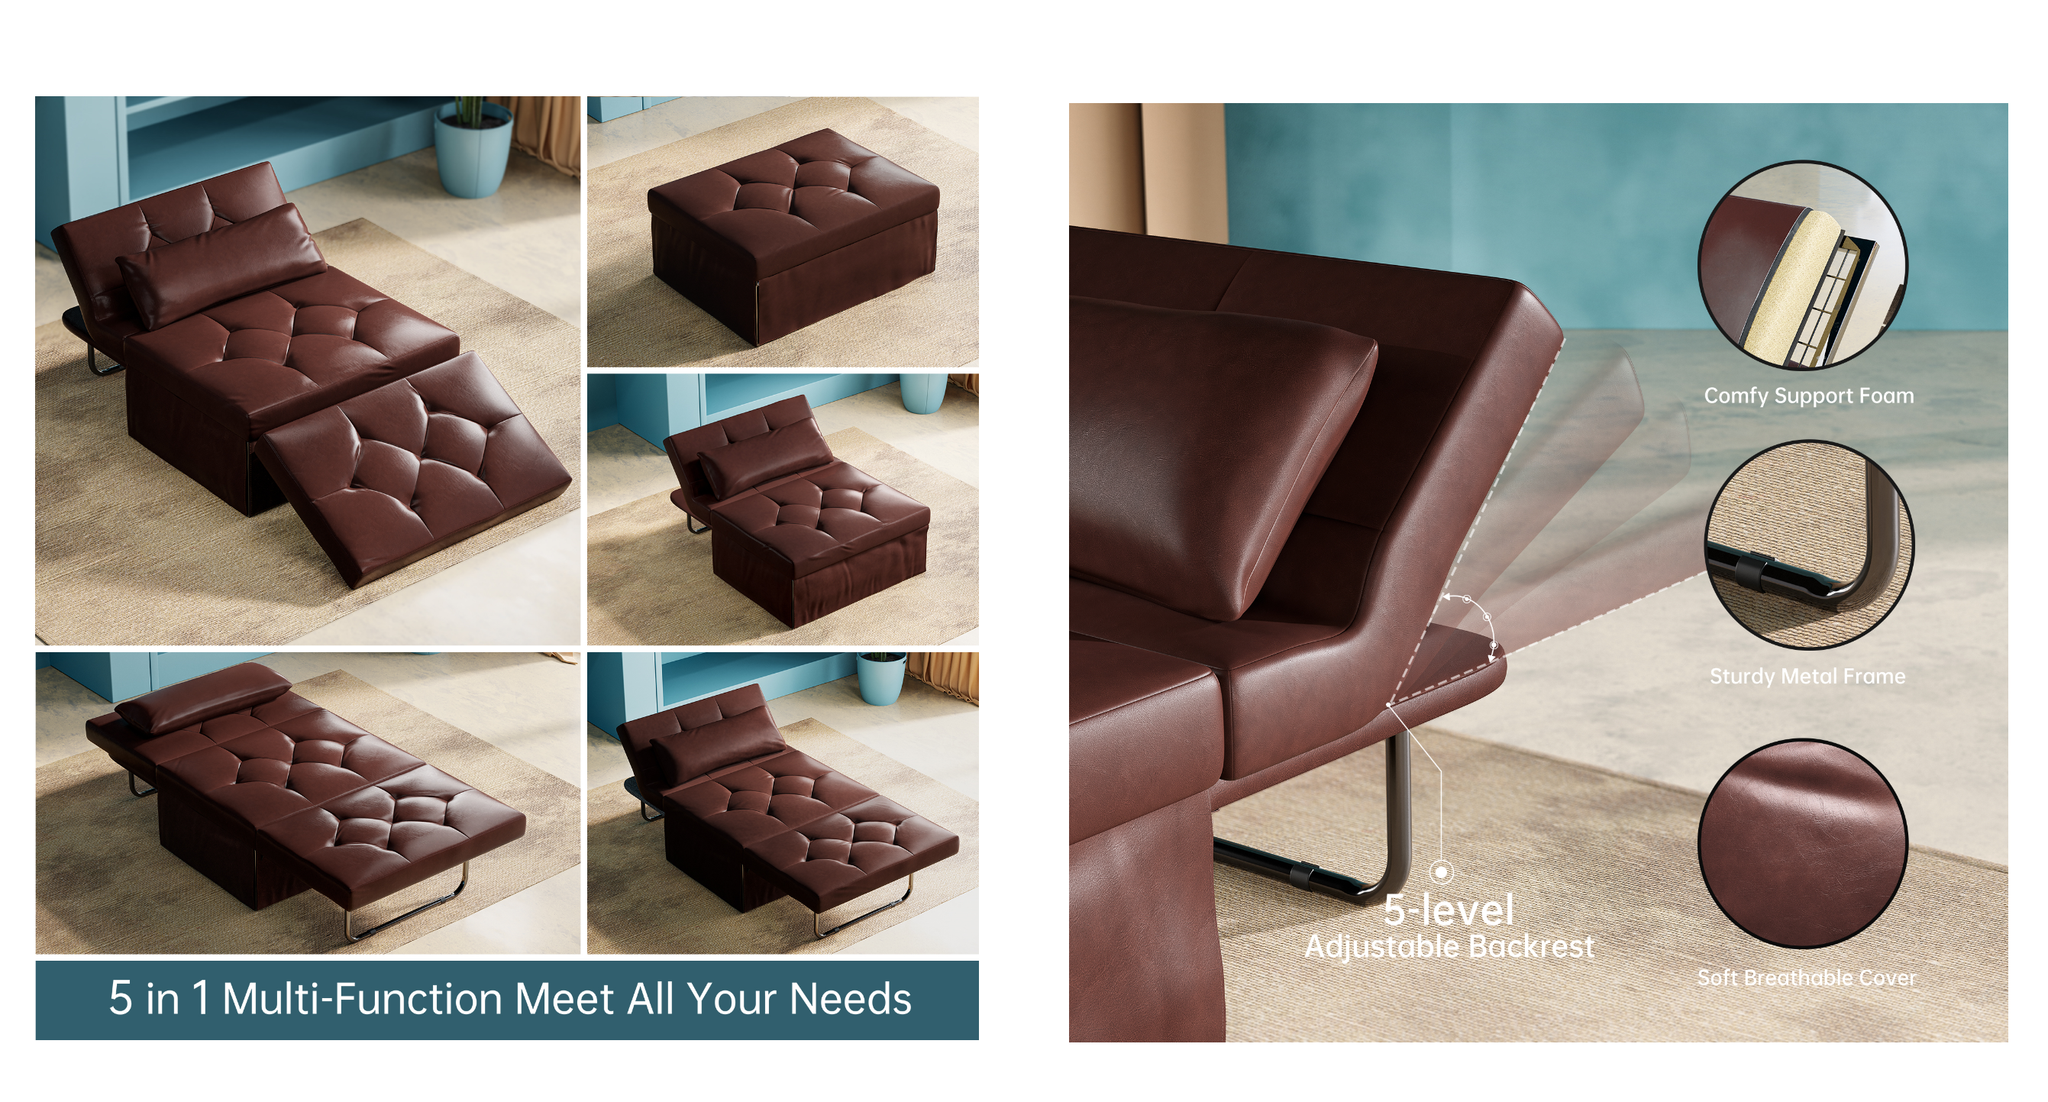 5-level locking adjustment system allows you to get the optimal recline angle for ultimate comfort